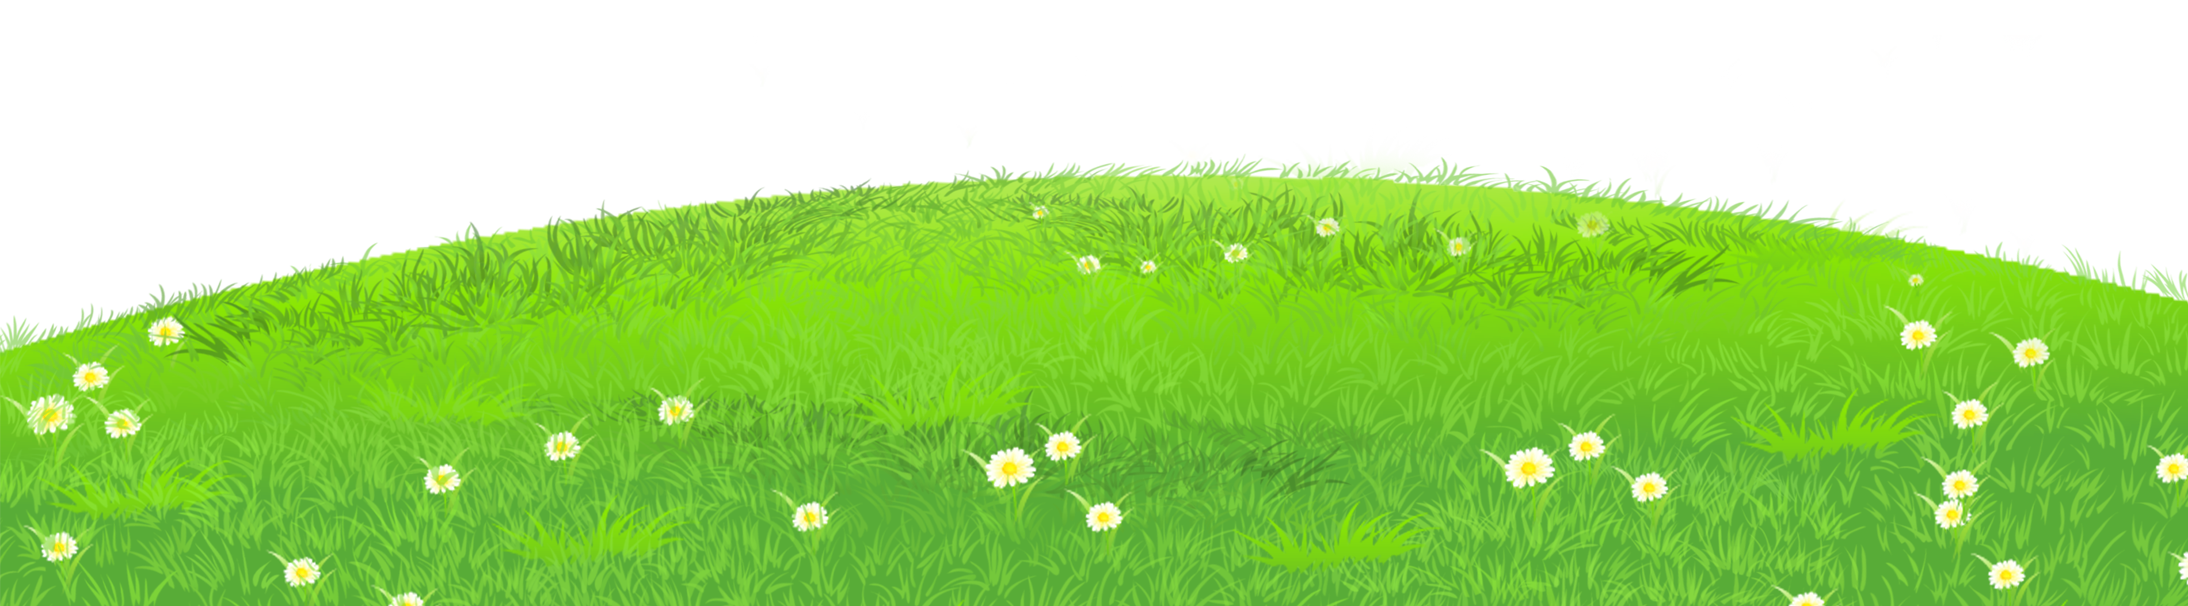 Grass with daisies clipart 0